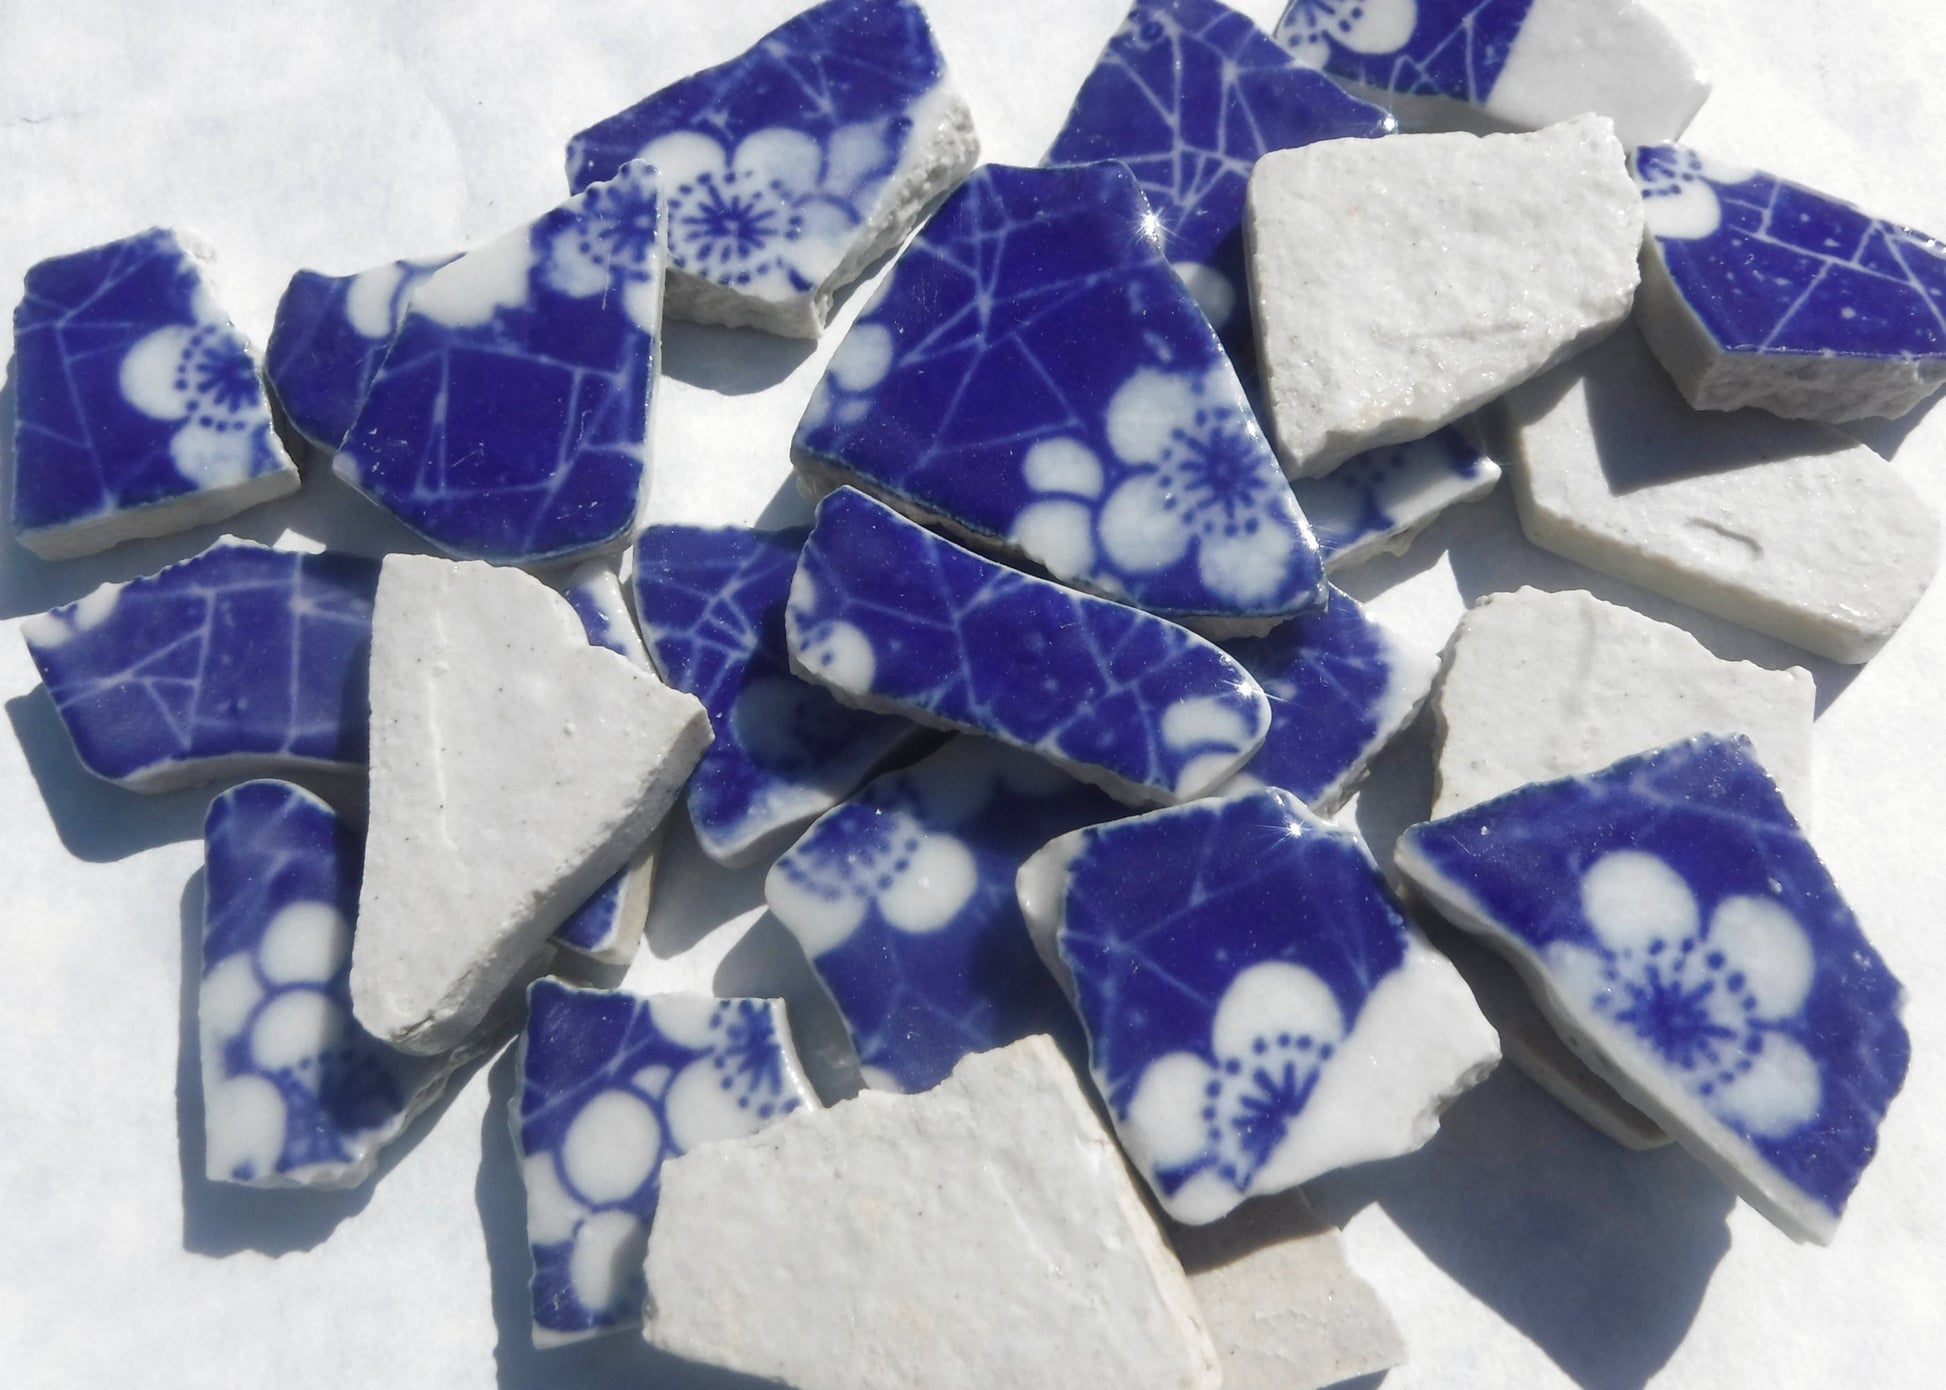 White Flowers on Deep Blue Chunky Floral Mosaic Tiles - Half Pound